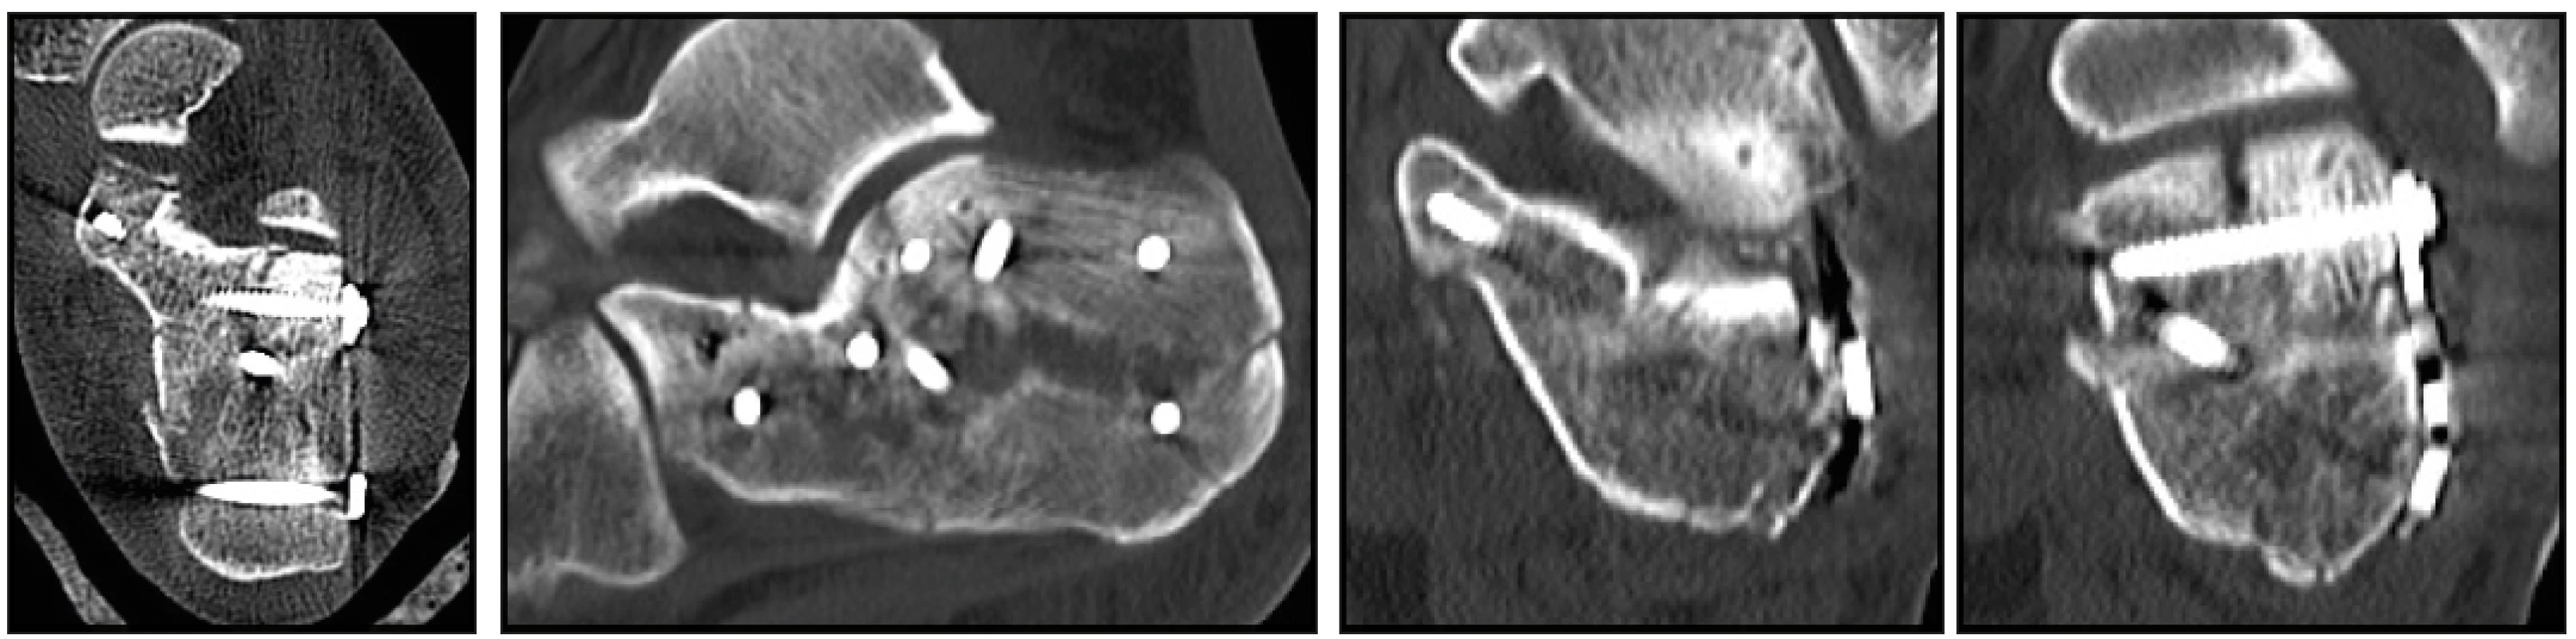 Postoperative CT images after osteosynthesis of calcaneus fracture by plate